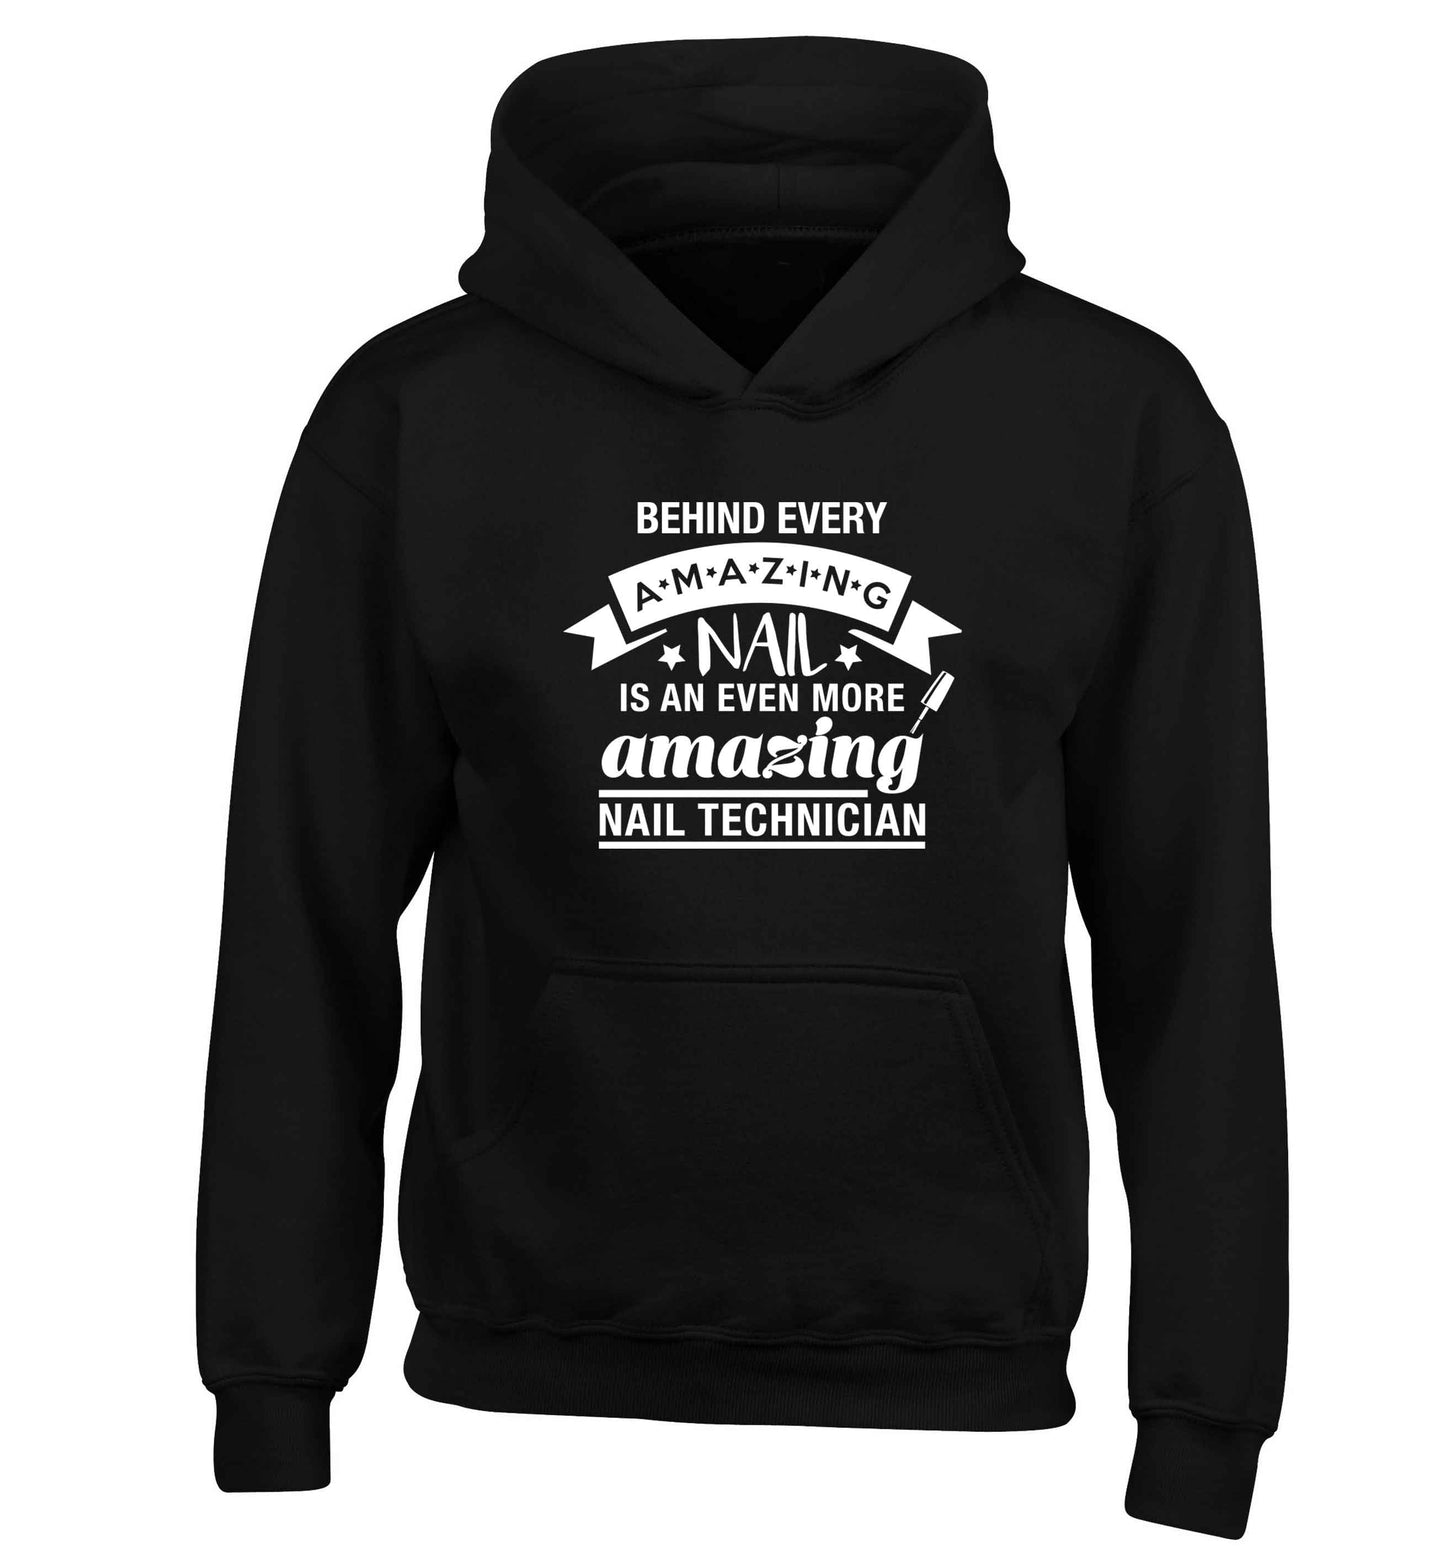 Behind every amazing nail is an even more amazing nail technician children's black hoodie 12-13 Years